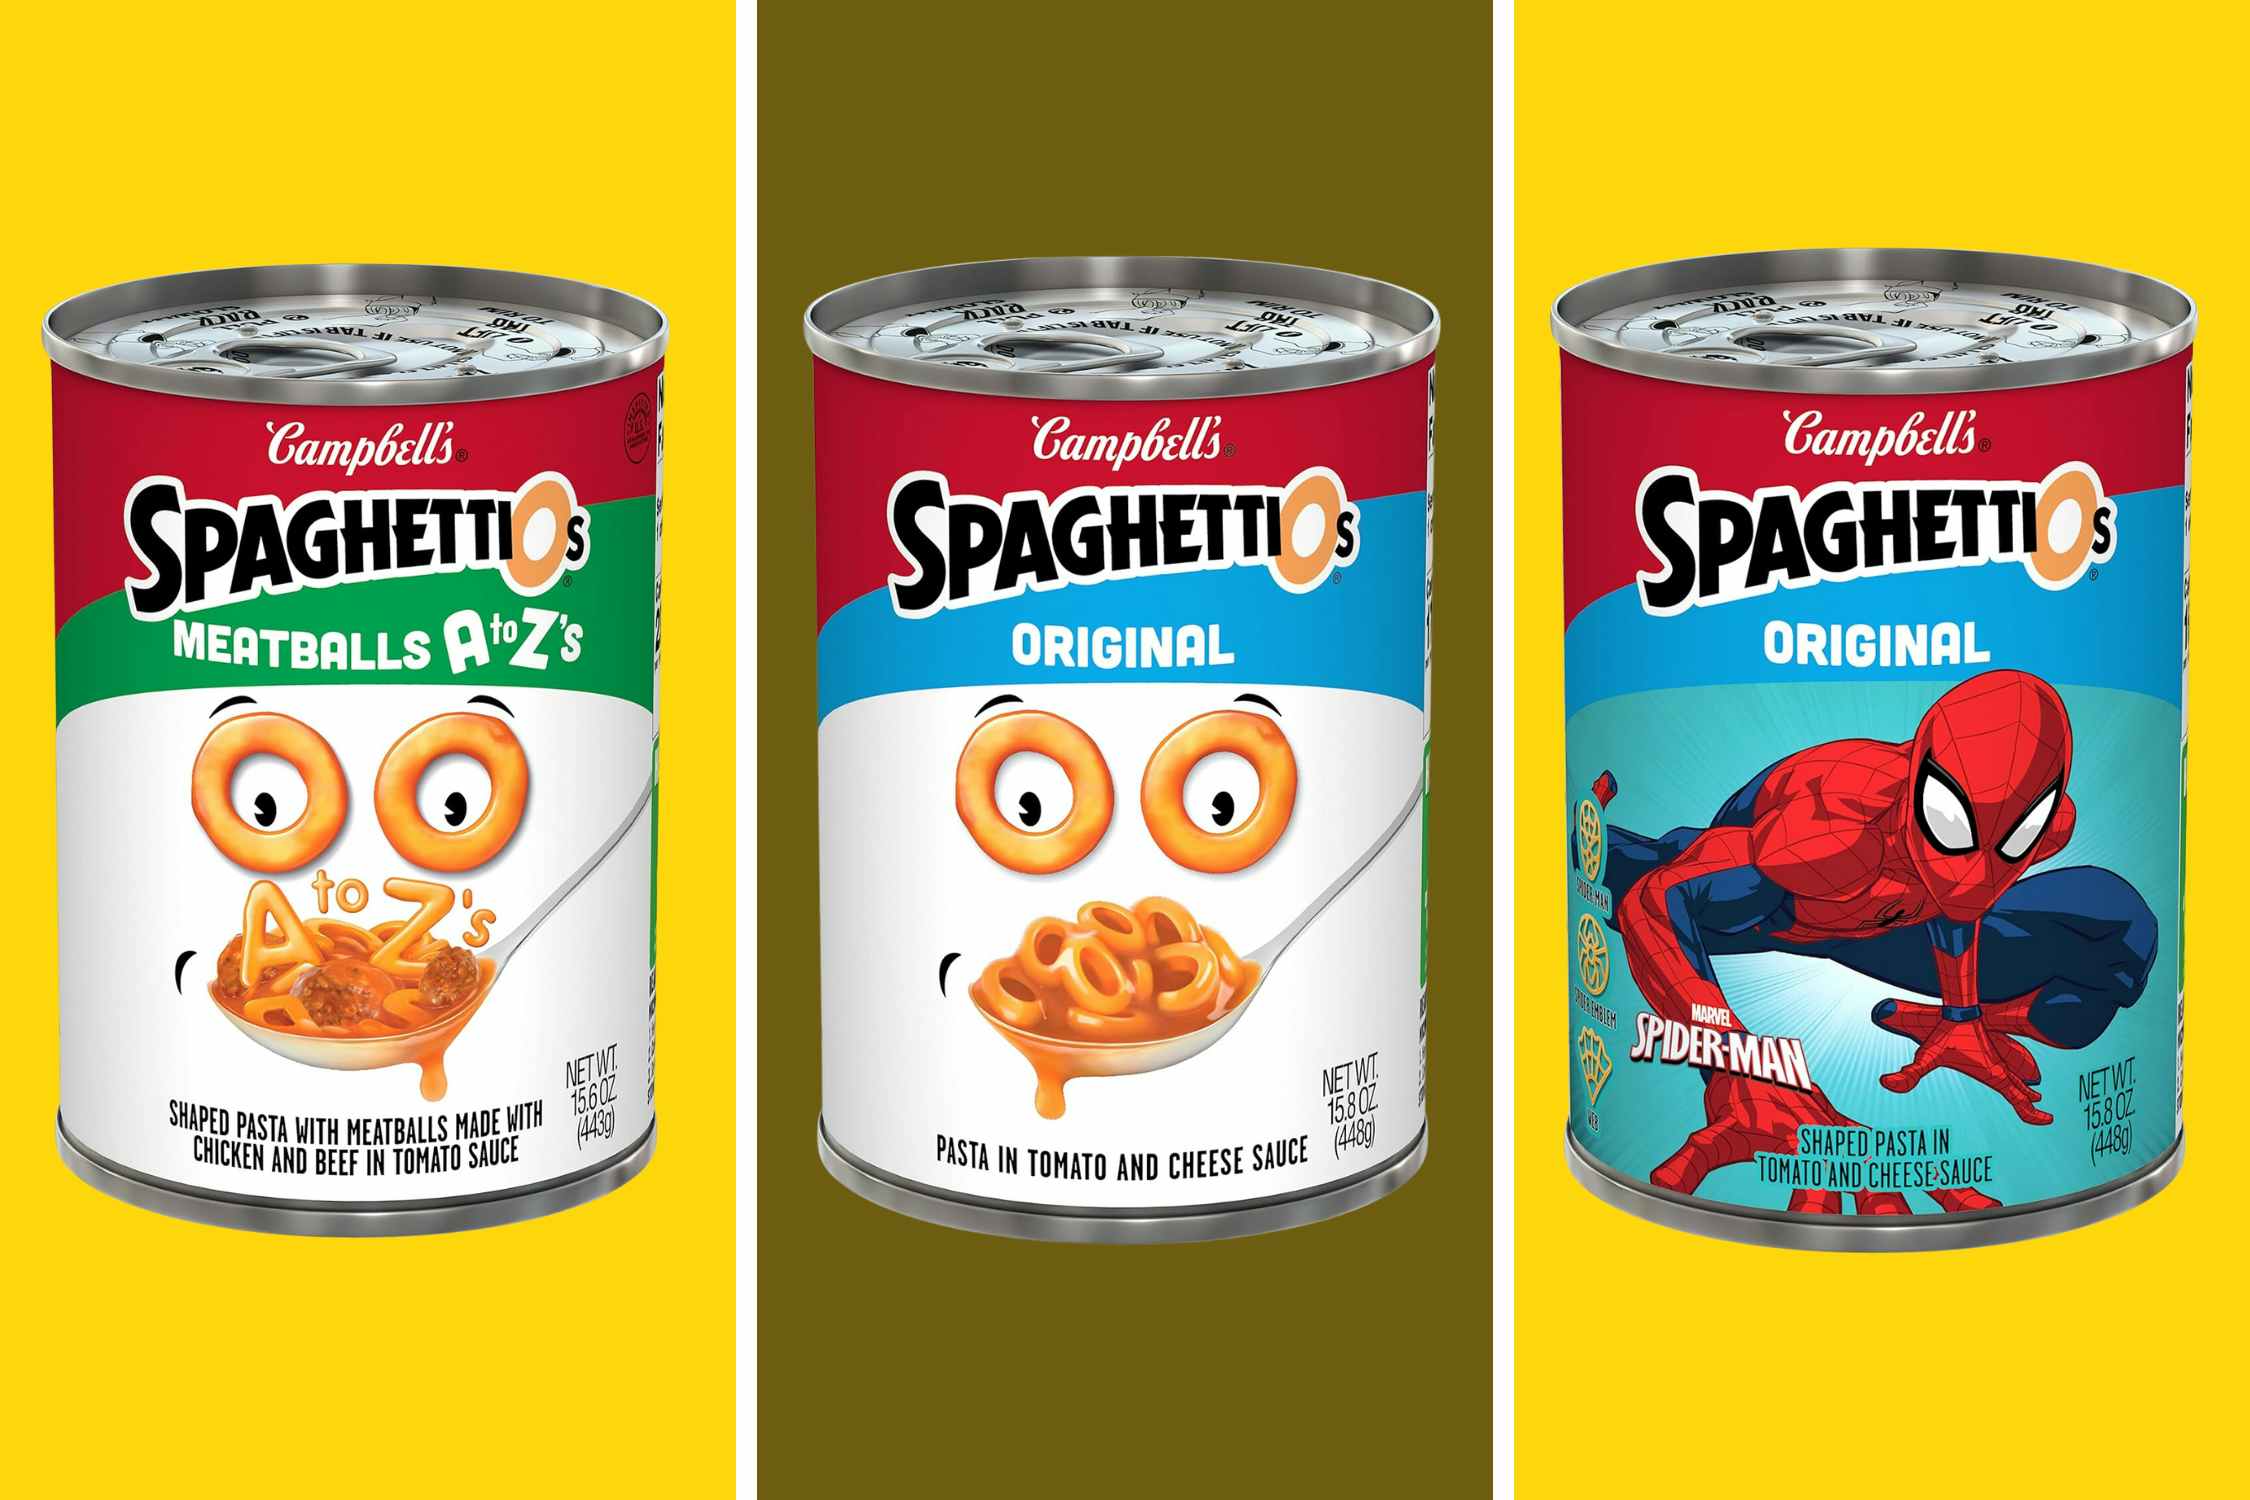 Campbell's Spaghettios Pasta, as Low as $0.82 on Amazon